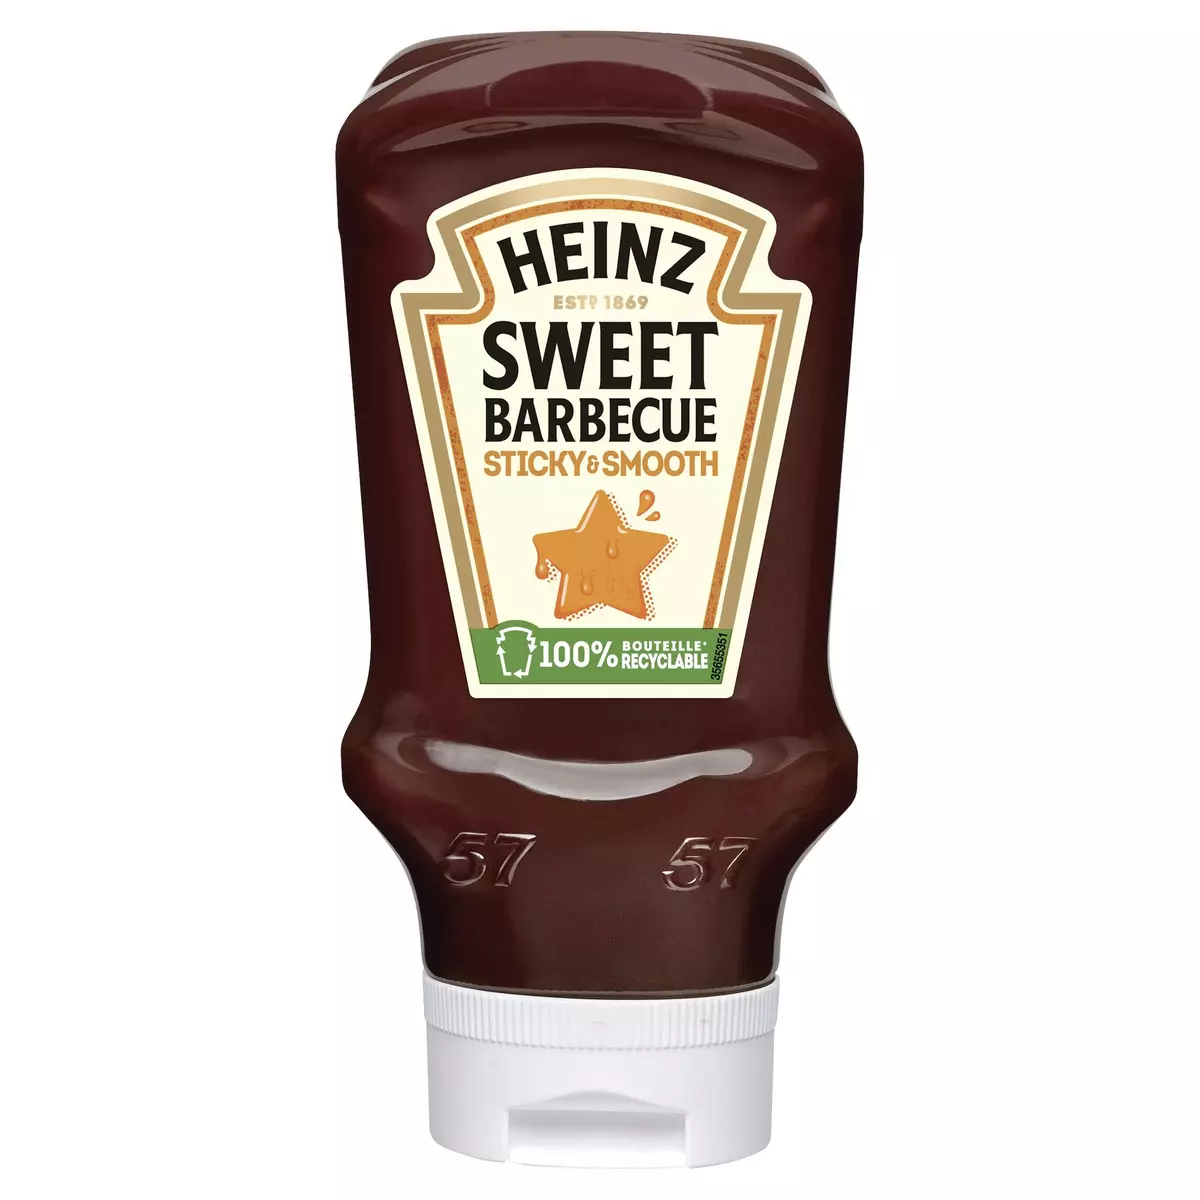 HEINZ Sauce barbecue Sweet and Smooth flacon souple 500g